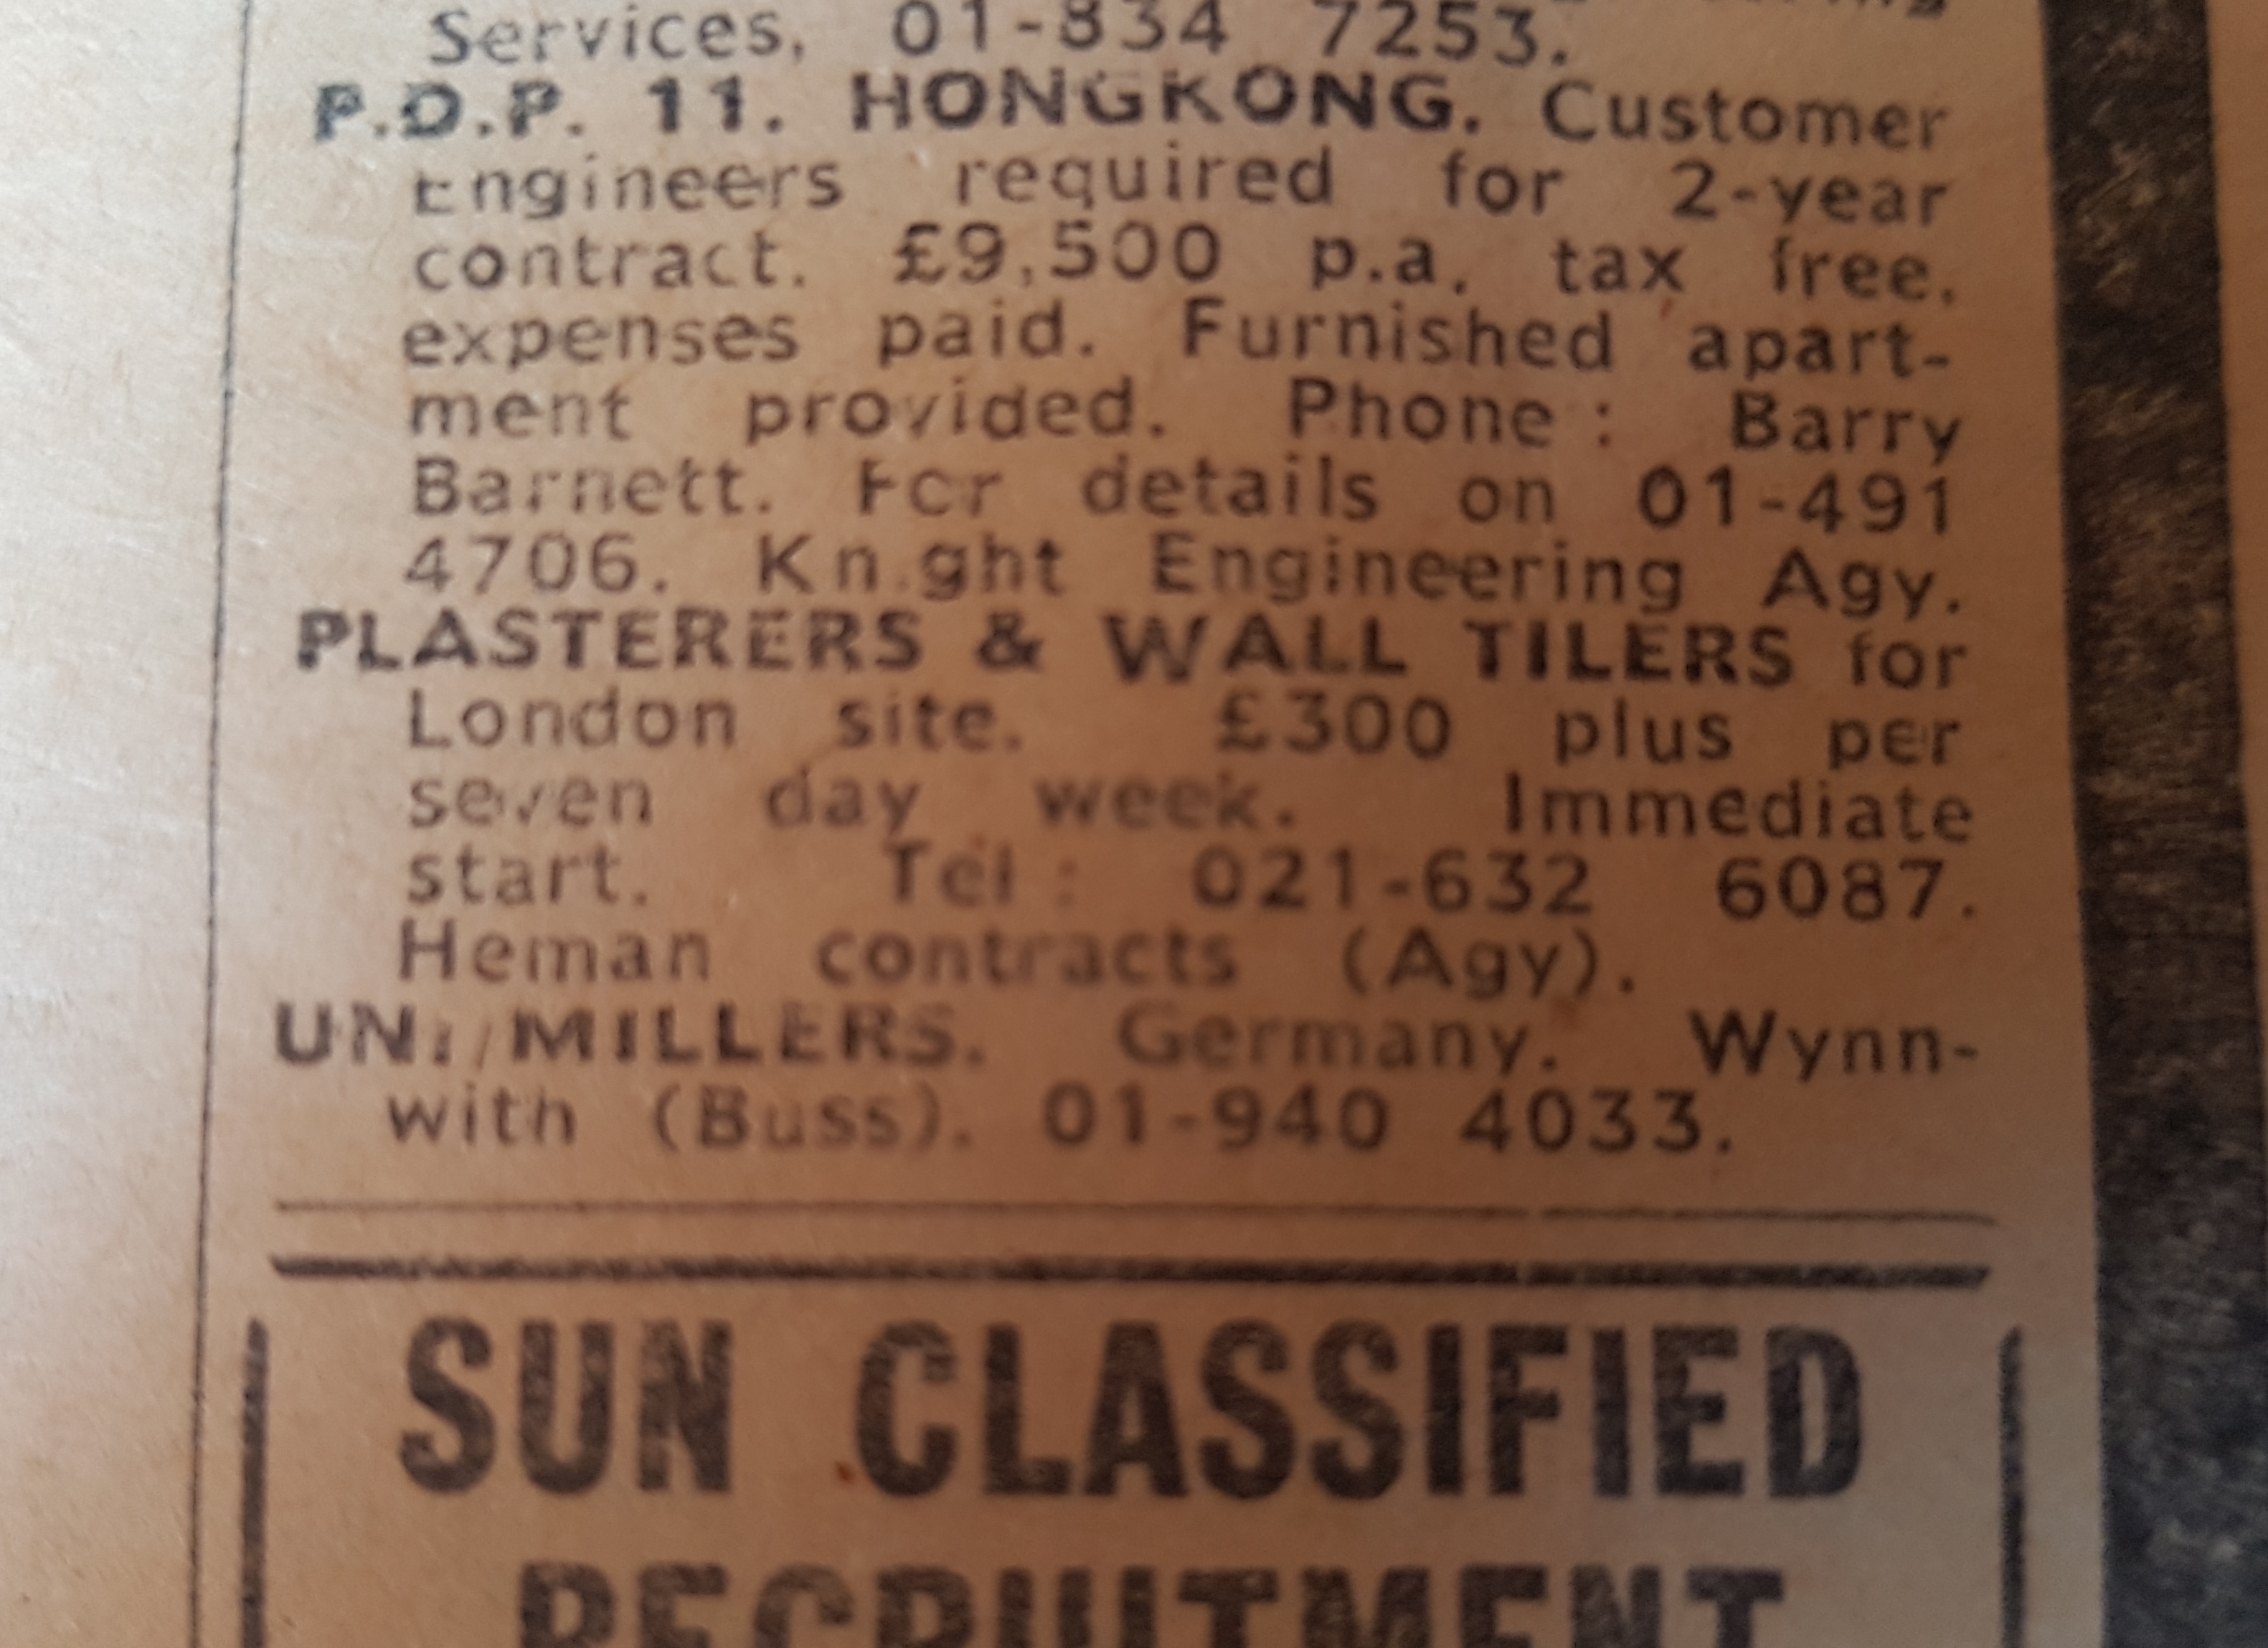 Good wages in 1980